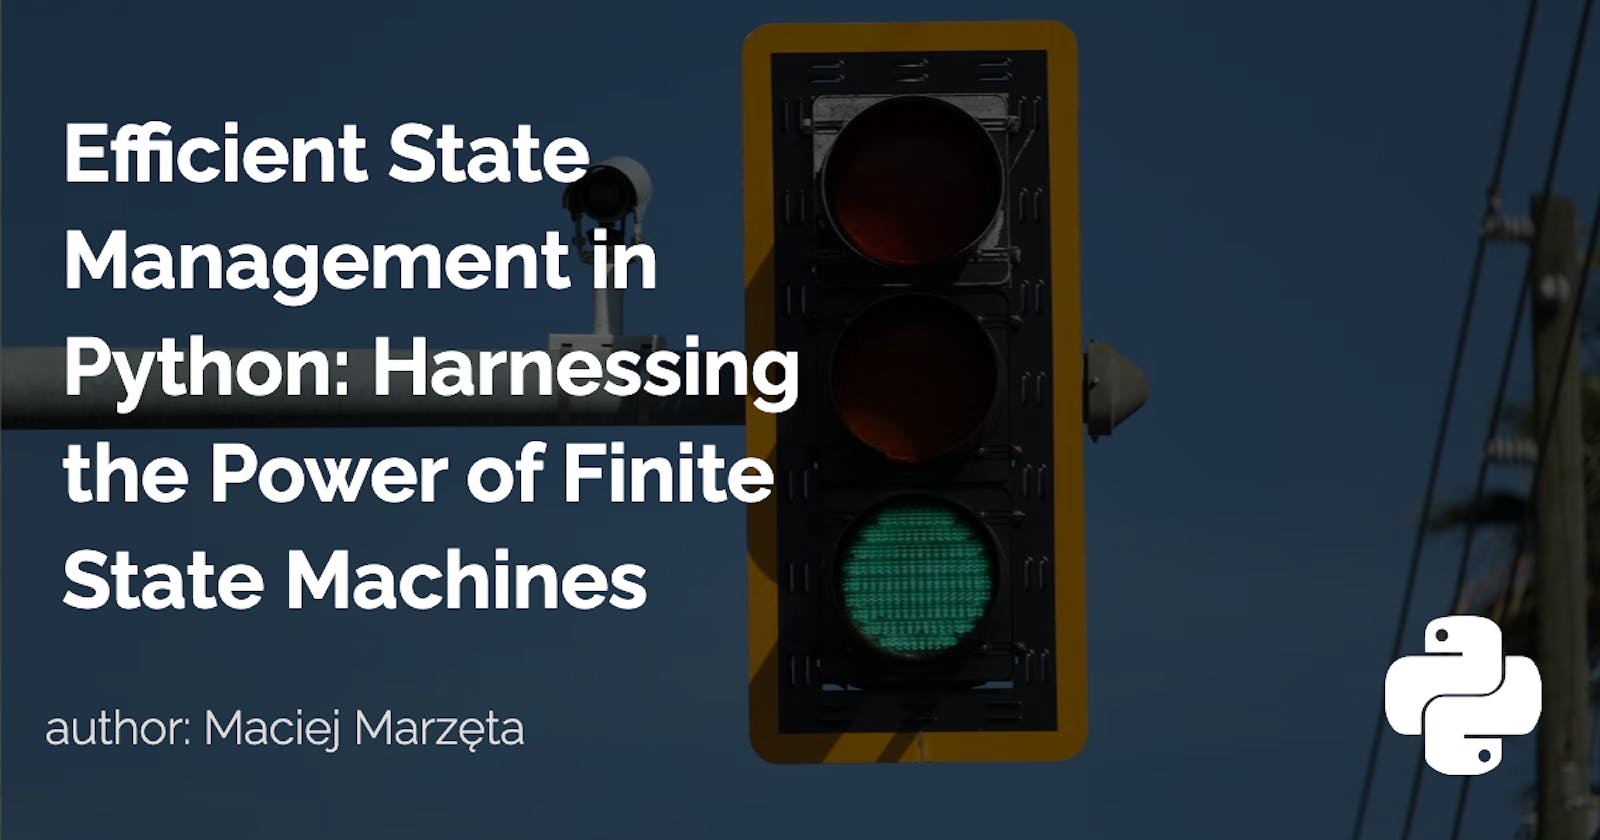 Efficient State Management in Python: Harnessing the Power of Finite State Machines